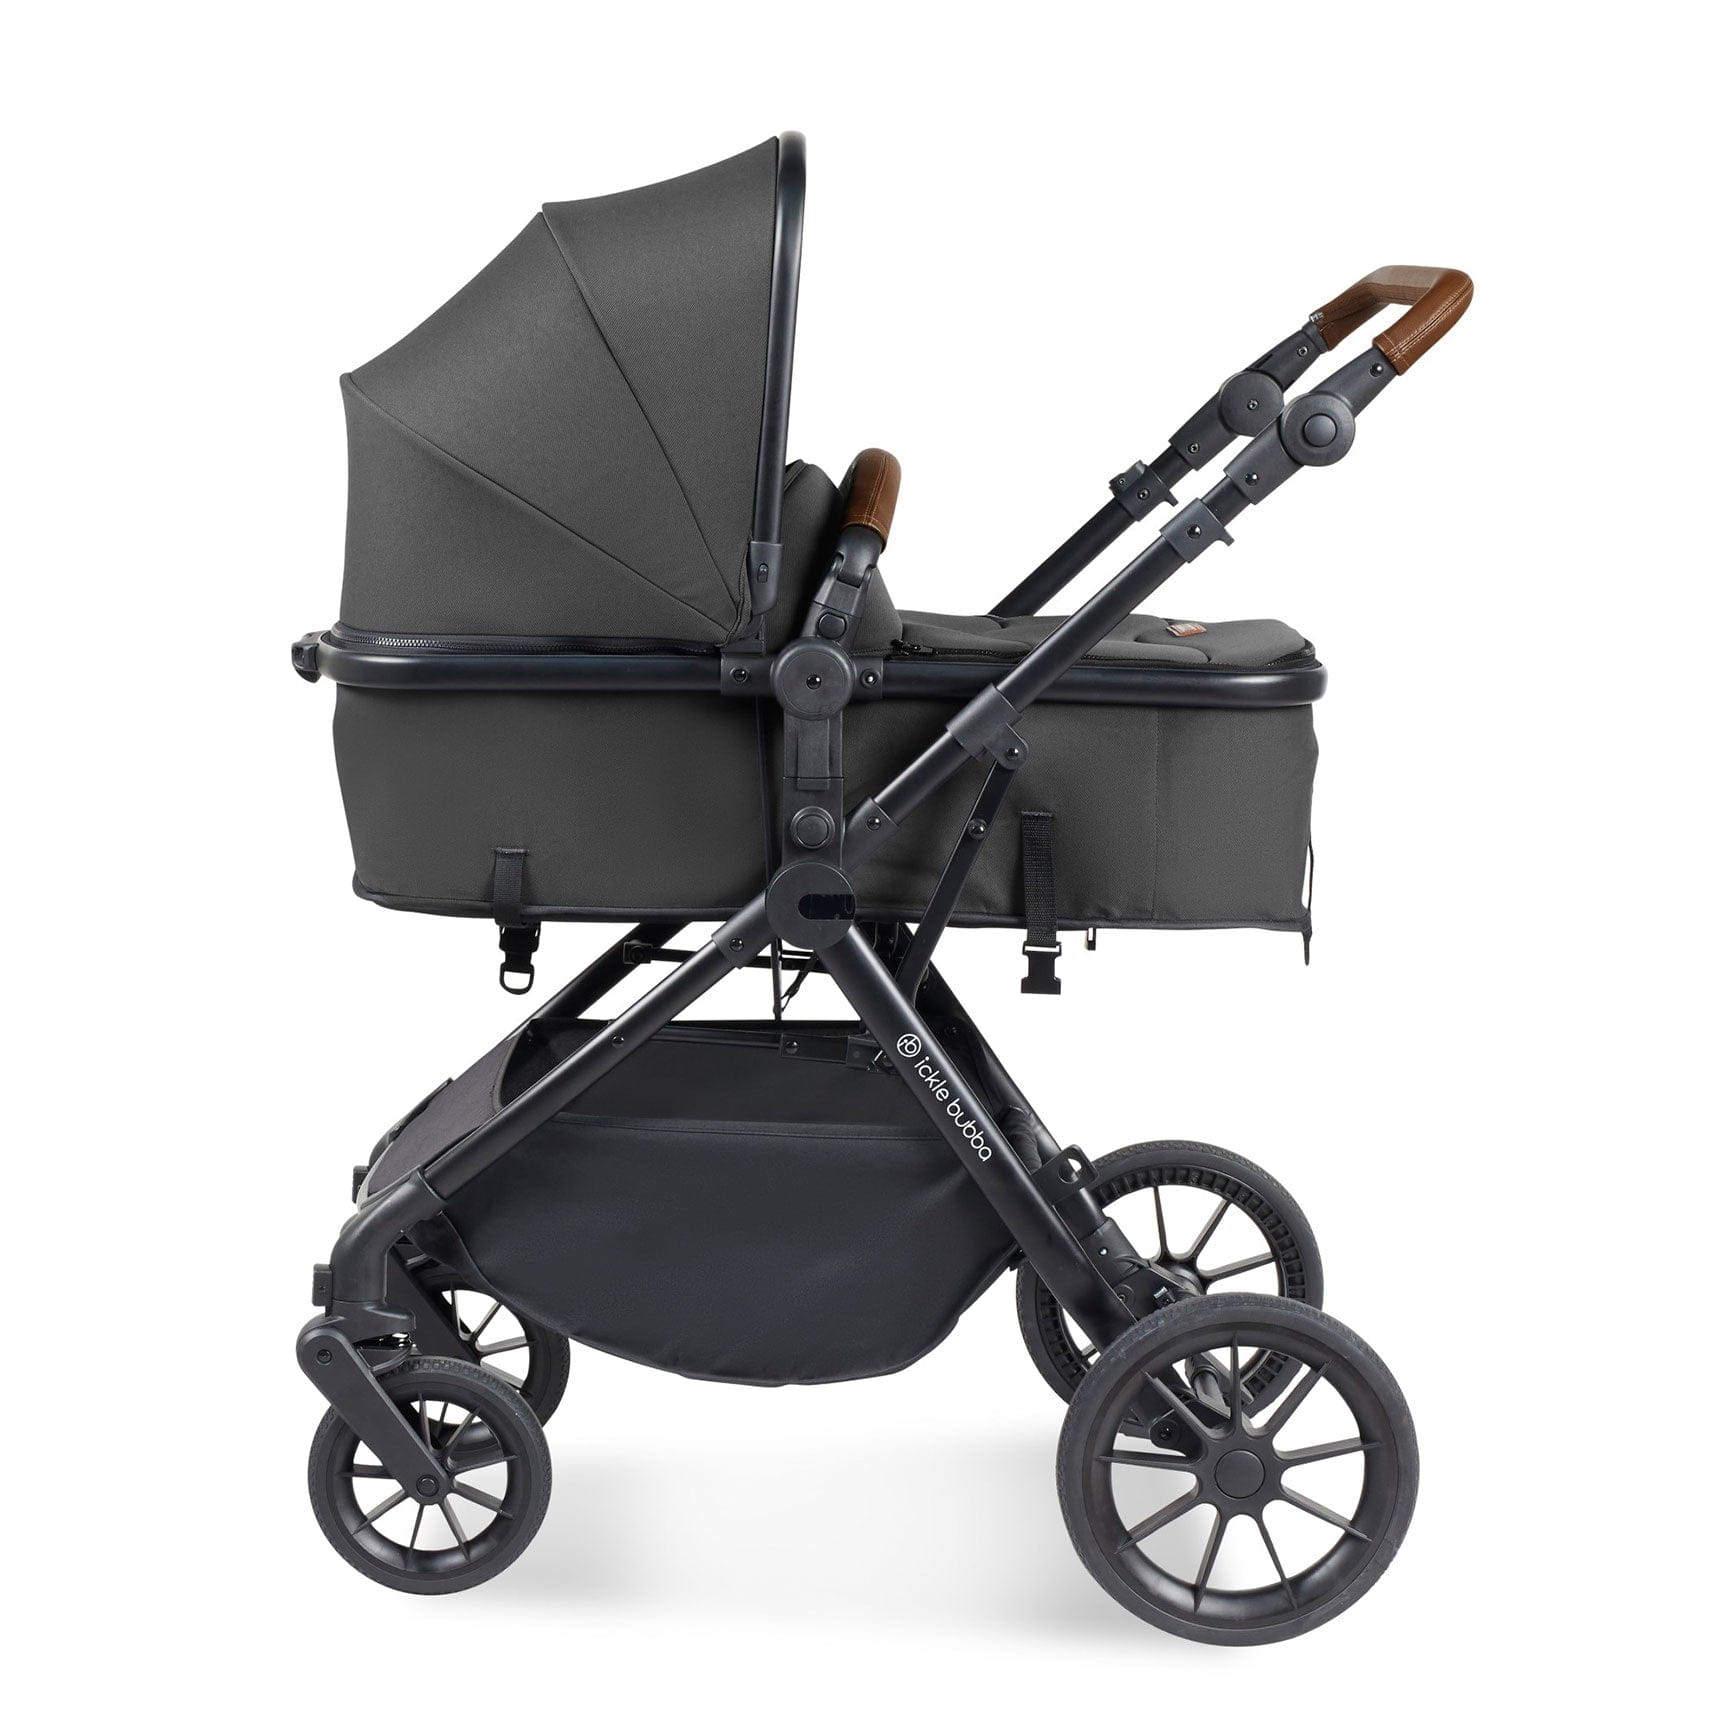 Ickle Bubba travel systems Ickle Bubba Cosmo All-in-One I-Size Travel System with Isofix Base - Black/Graphite Grey 10-007-300-007